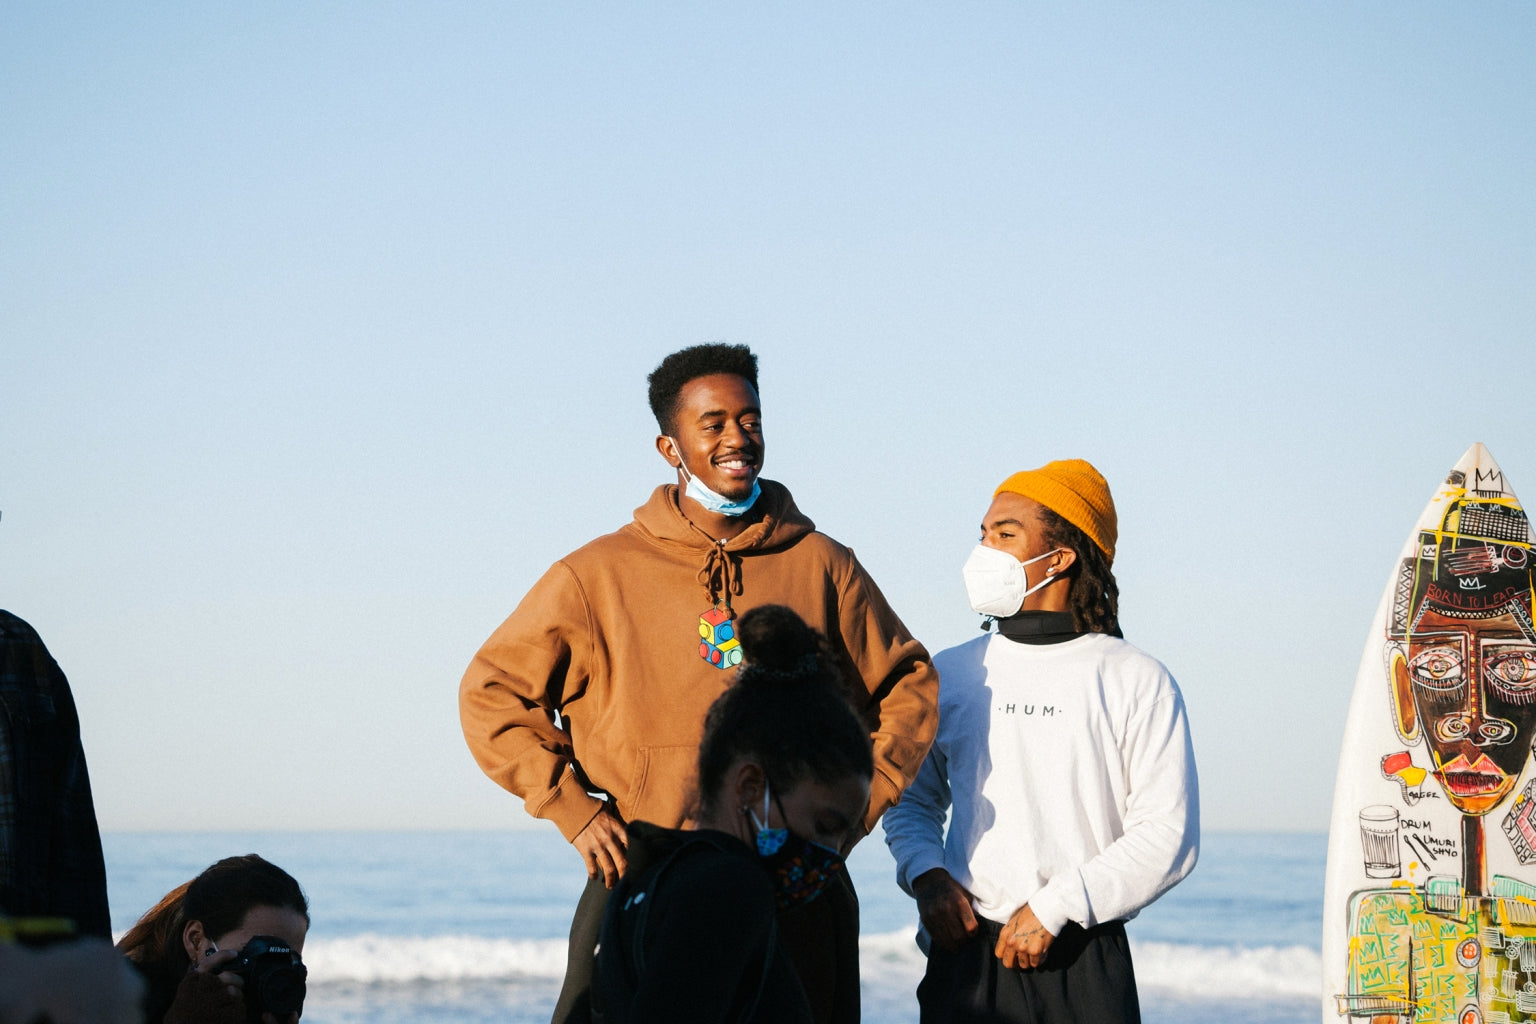 Brick and Gage Crismond admire the turnout of Black surfers and their allies during Black Sand’s Peace Paddle on February 21, 2021.